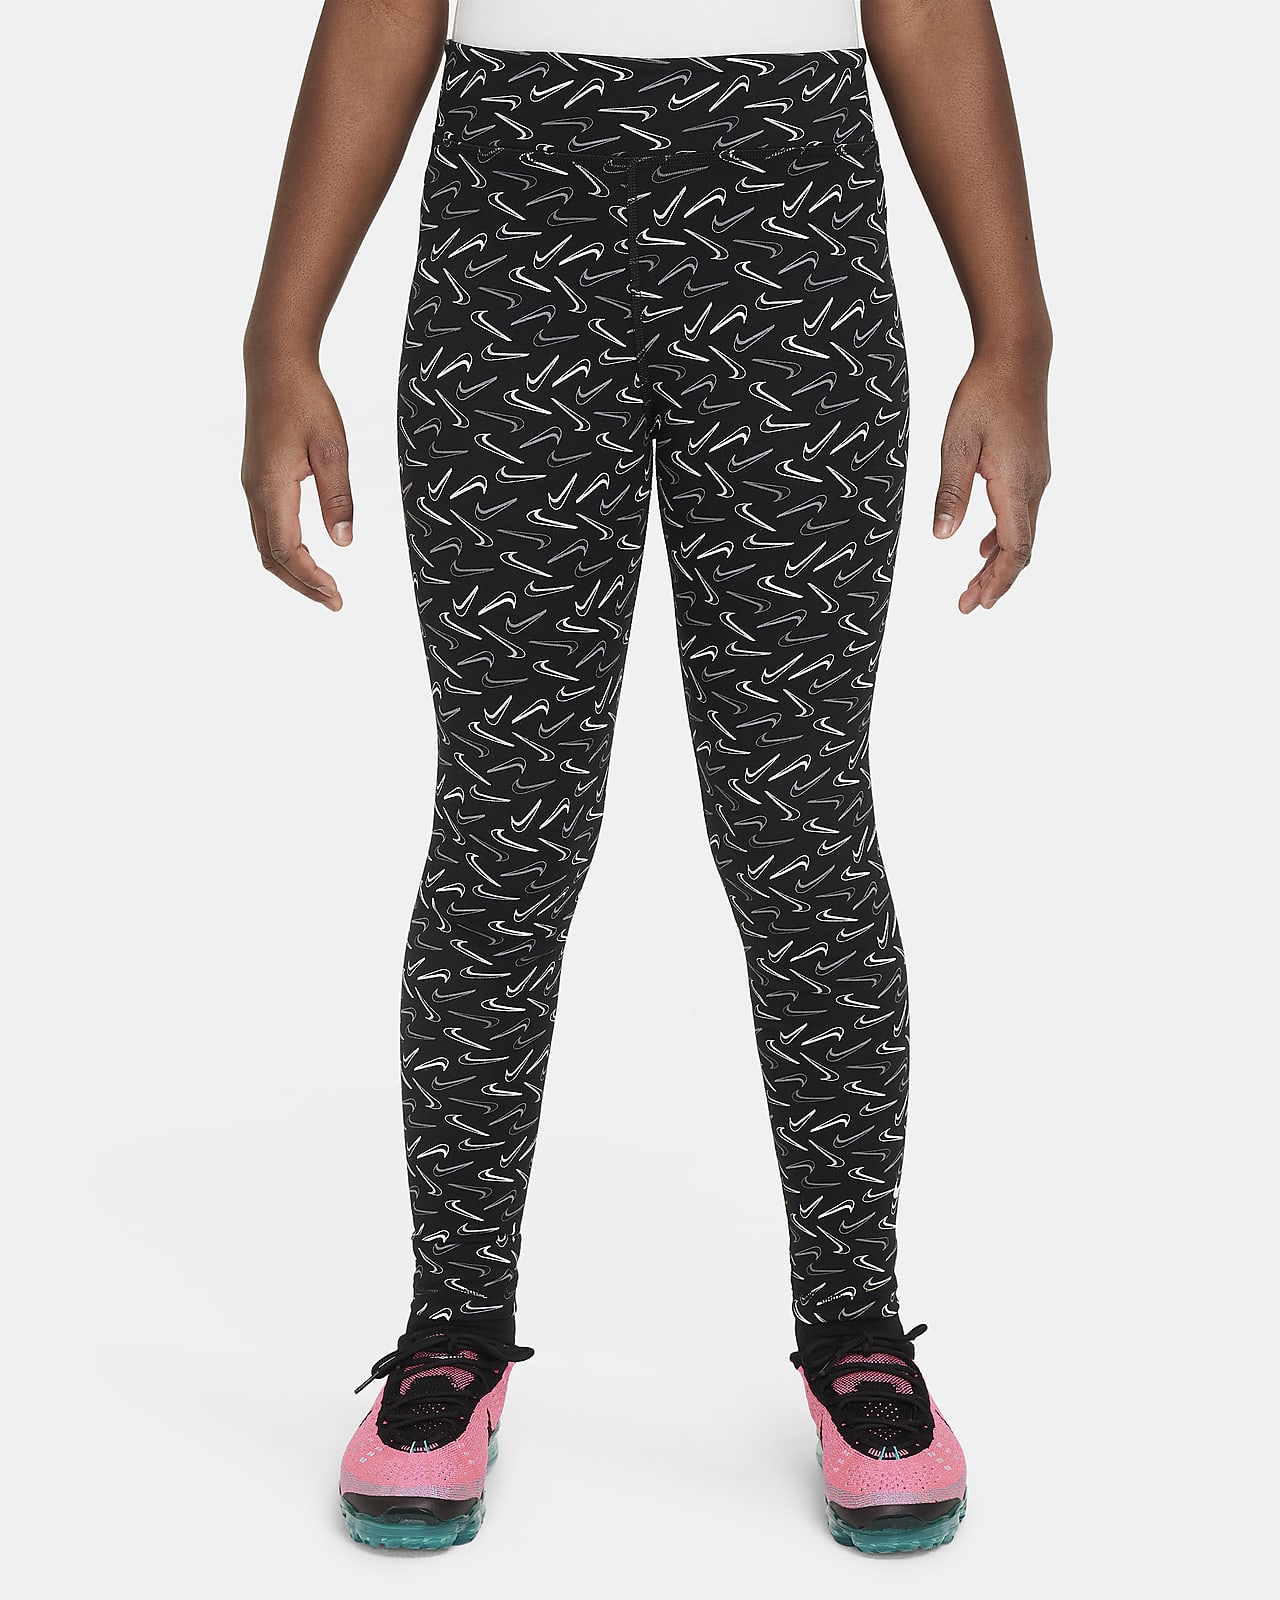 https://static.nike.com/a/images/t_PDP_1280_v1/f_auto,q_auto:eco/fb6c9279-a7f0-41b6-8785-17bf44e44241/leggings-a-vita-media-sportswear-essential-ngt0nm.png